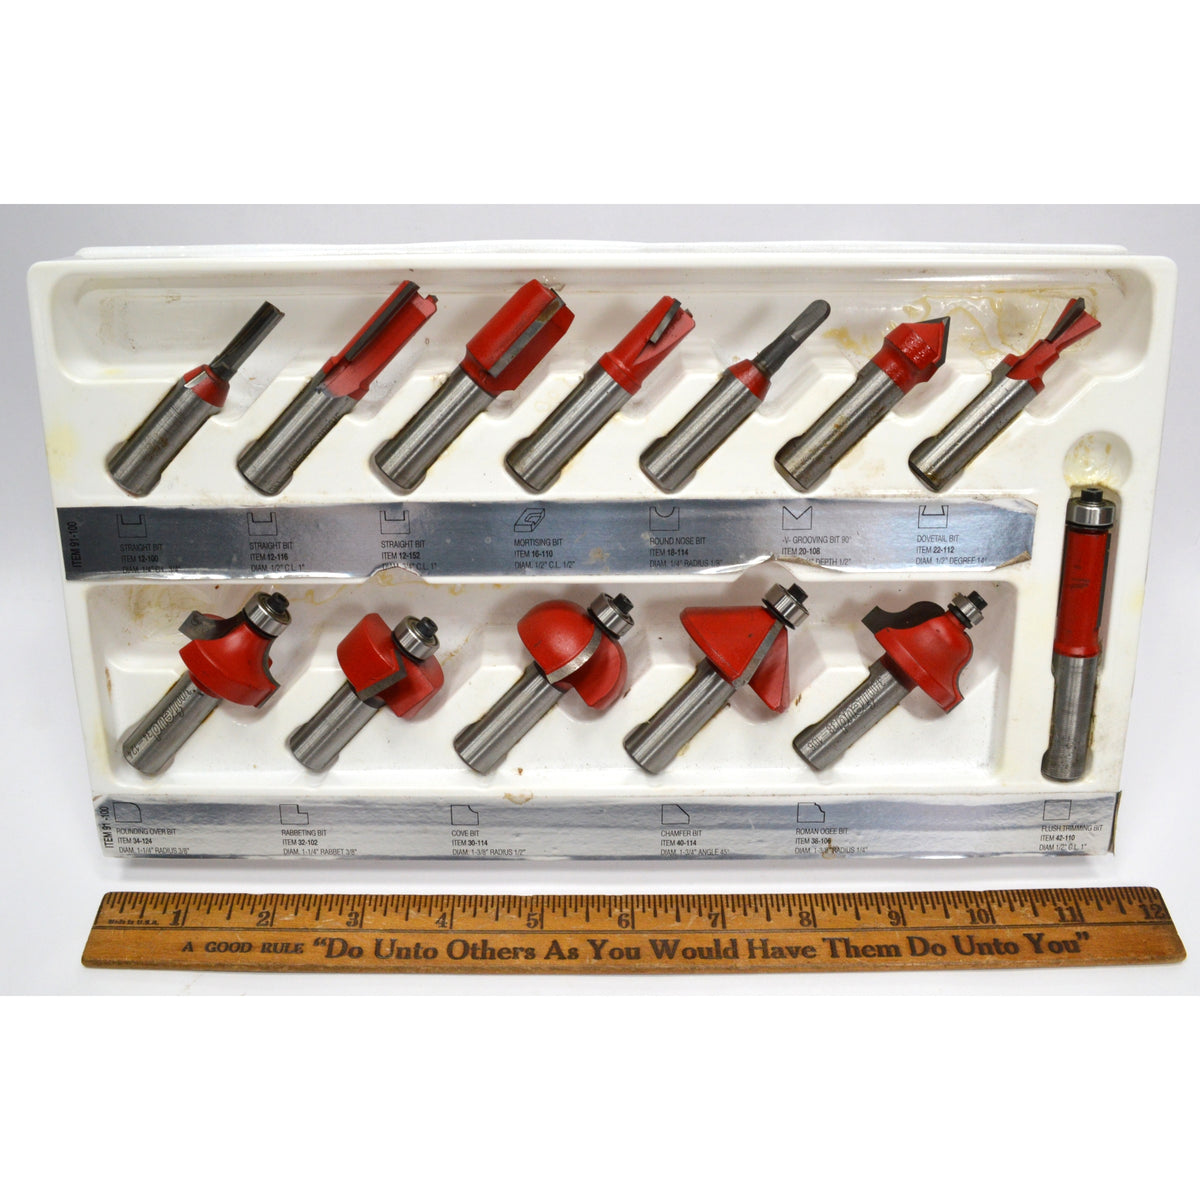 Complete! FREUD 'WOODWORKING ROUTER BIT SET' #91-100 w/ 13